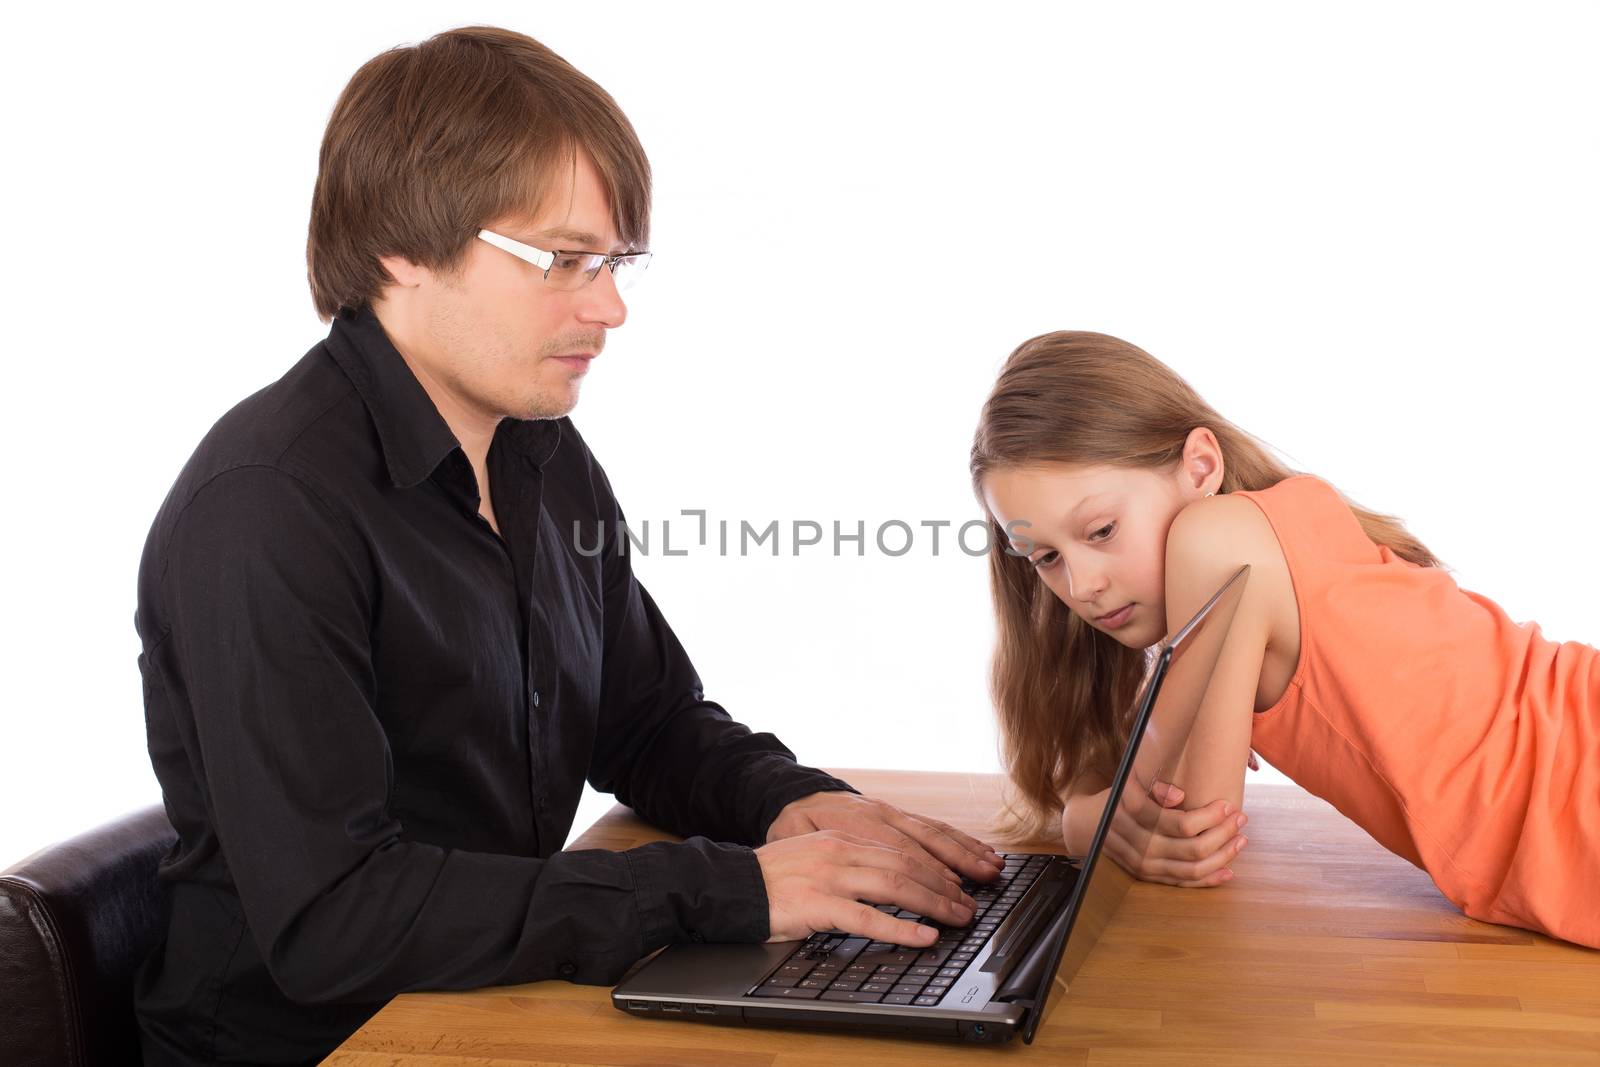 Daughter looks at her father's laptop by lusjen_n